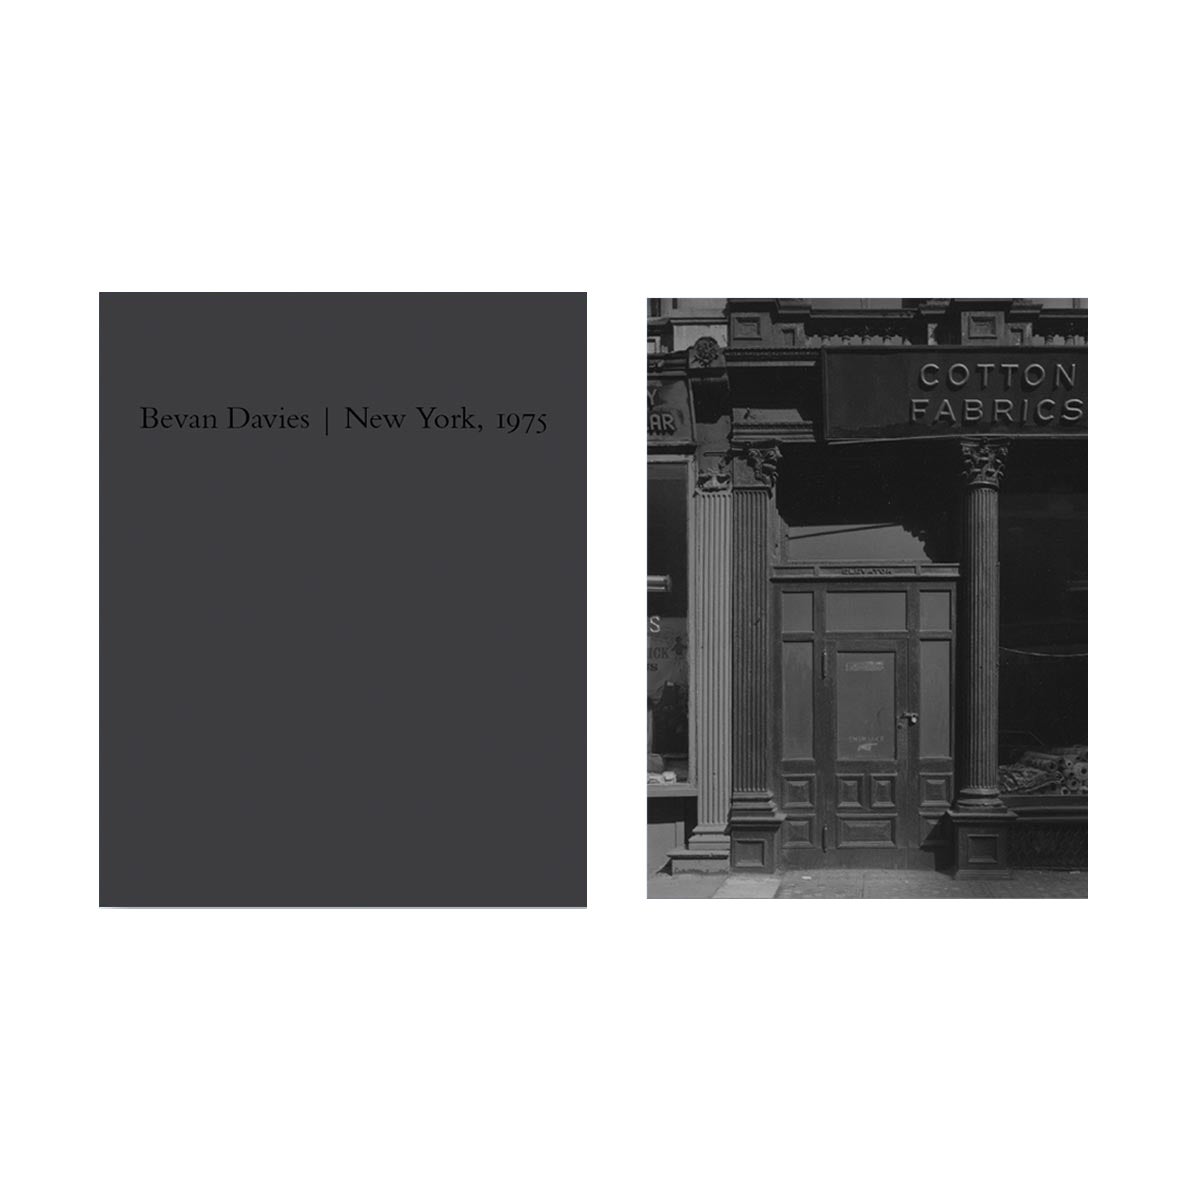 NZ Library #3: Bevan Davies: New York, 1975, Special Limited Edition (with Print) (NZ Library - Set Three) [SIGNED]